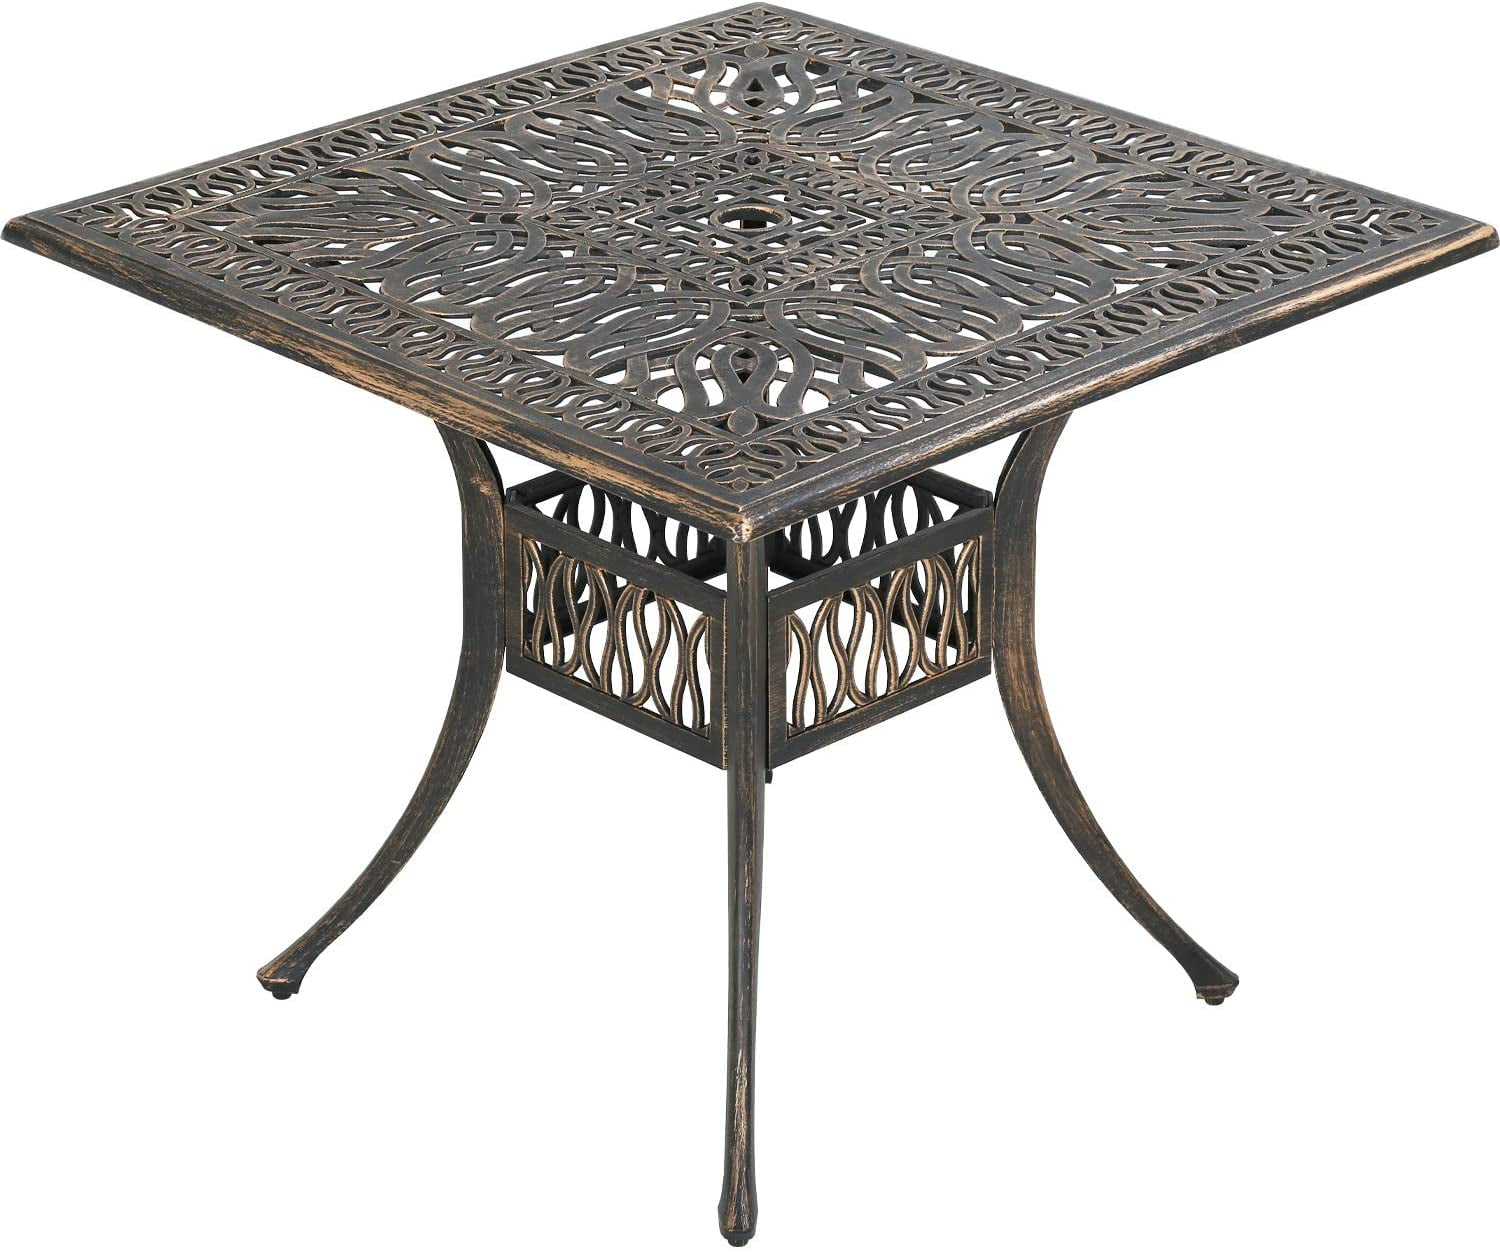 Fdw Patio Dining Table Outdoor, Wrought Iron Patio Dining Table For 6